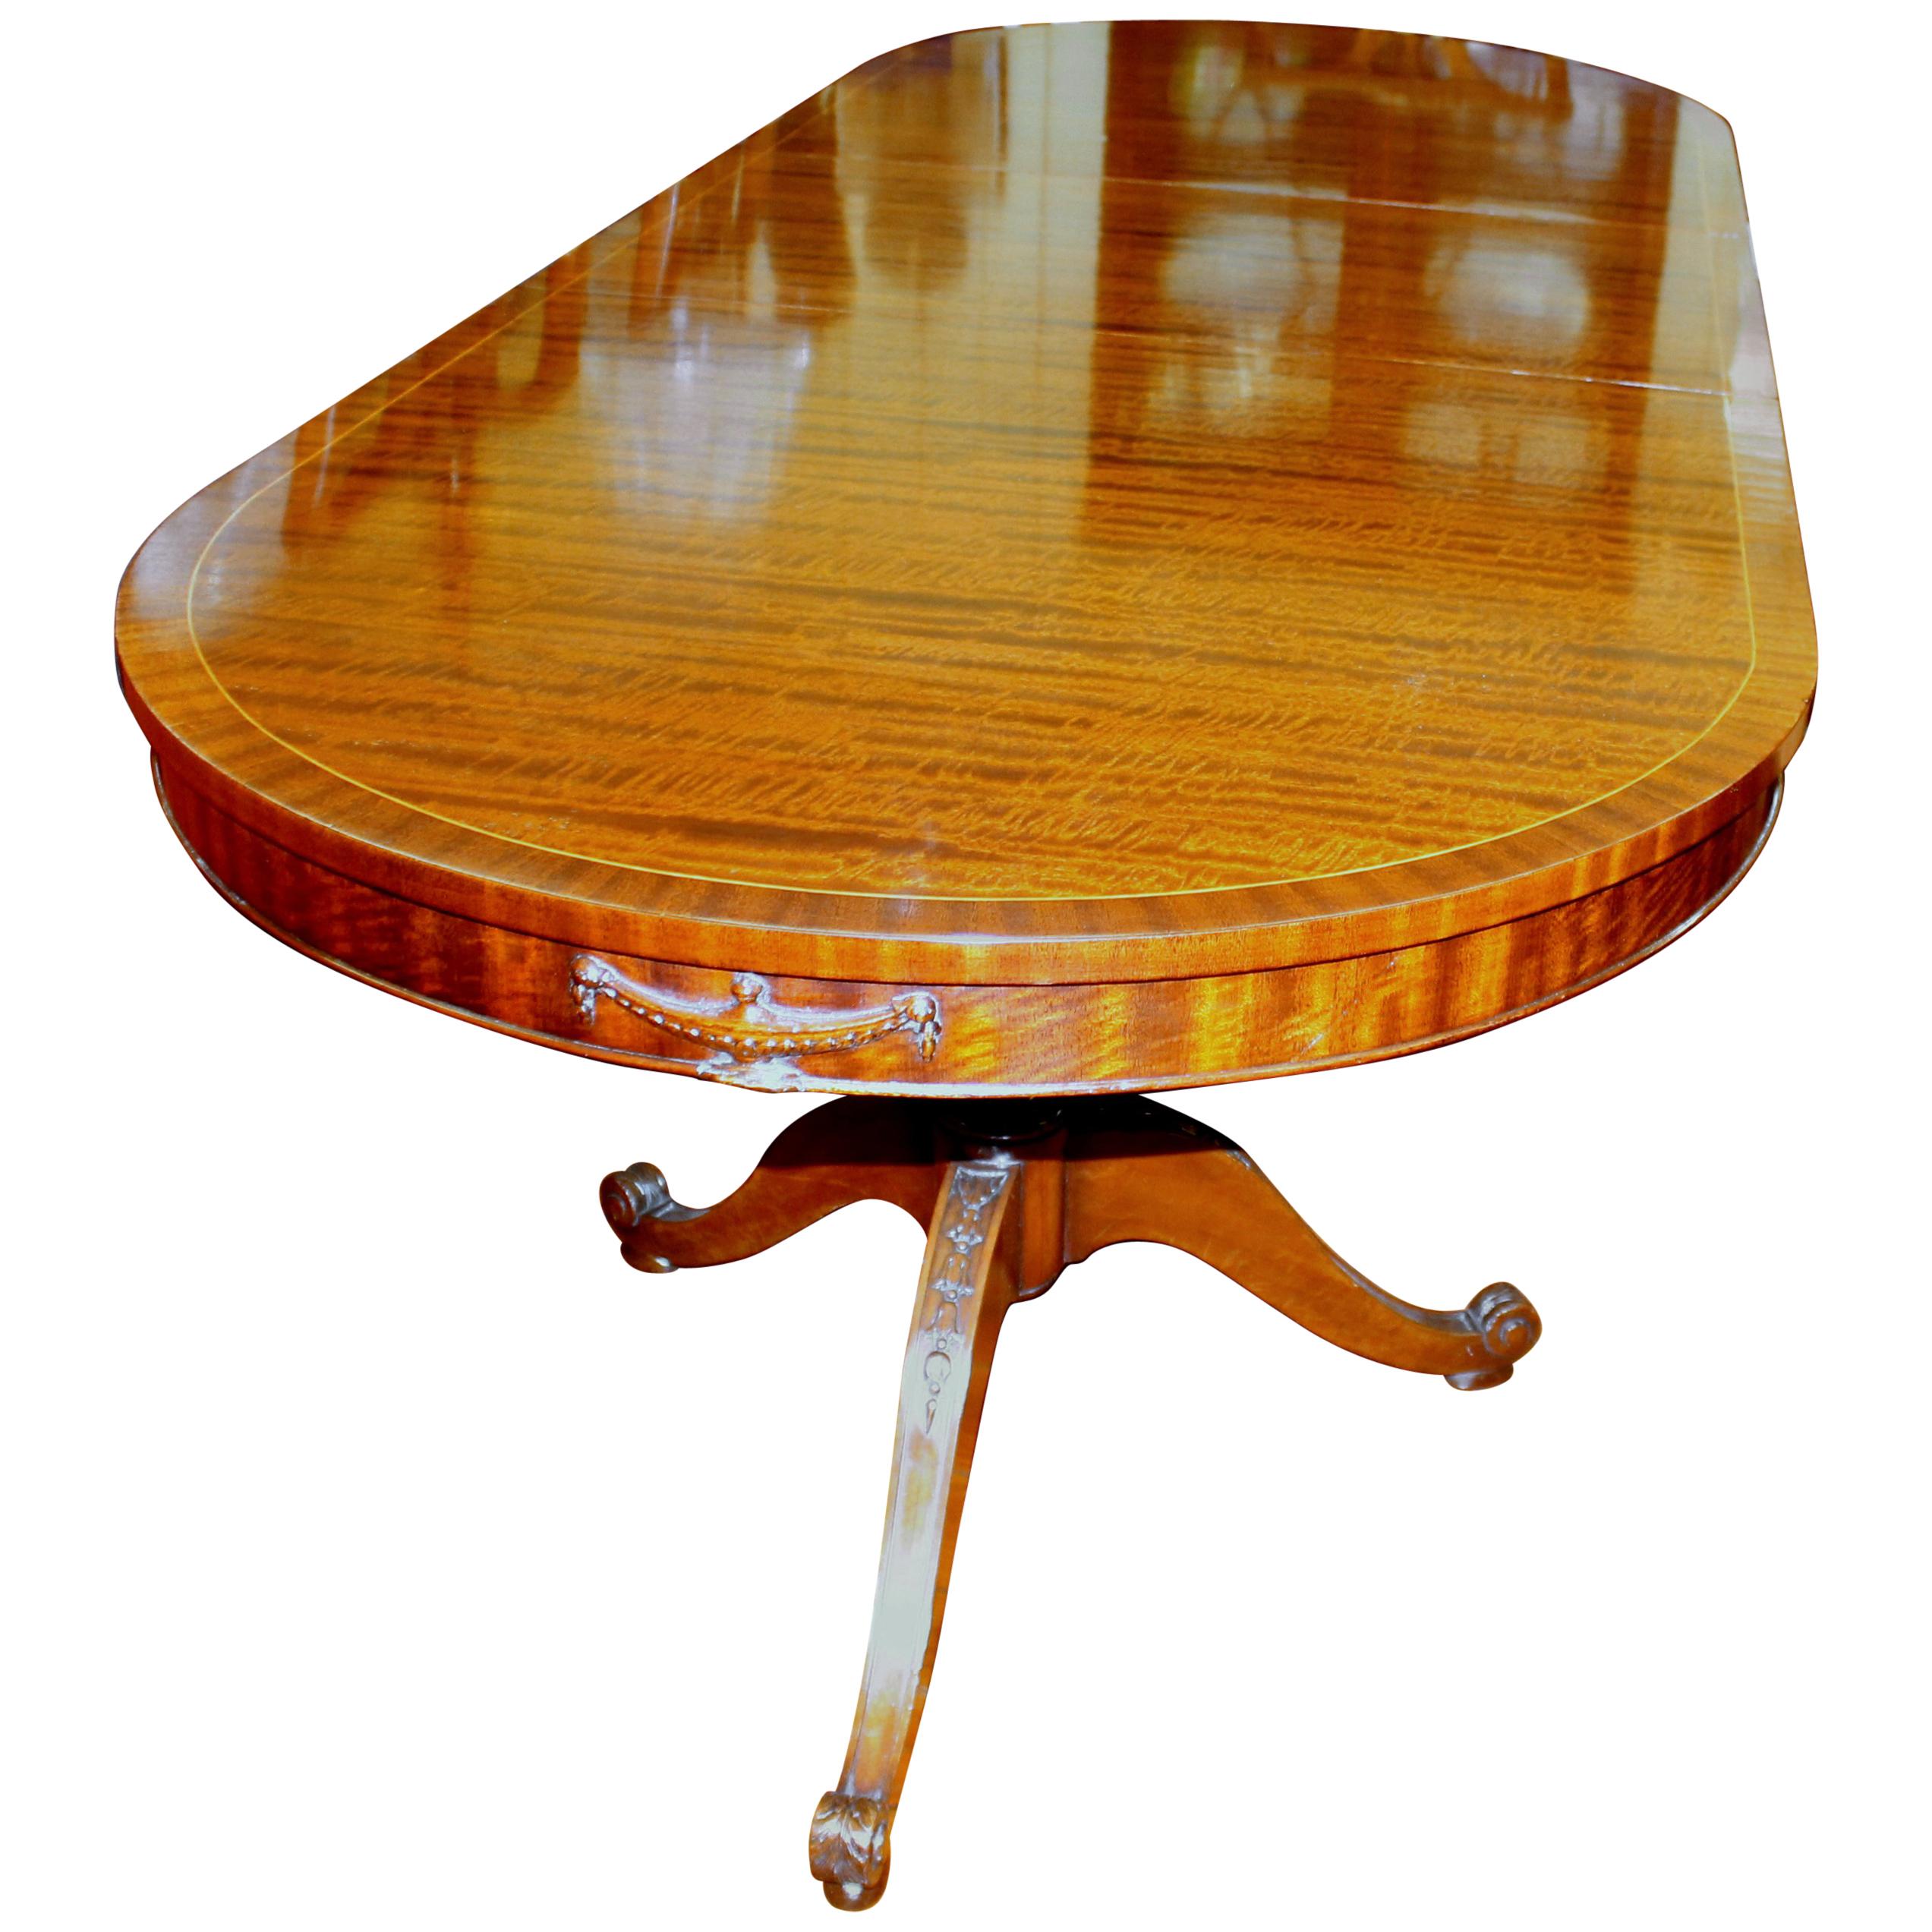 Old English Figured Fiddle Grain Inlaid Mahogany "Adam" Style Dining Table